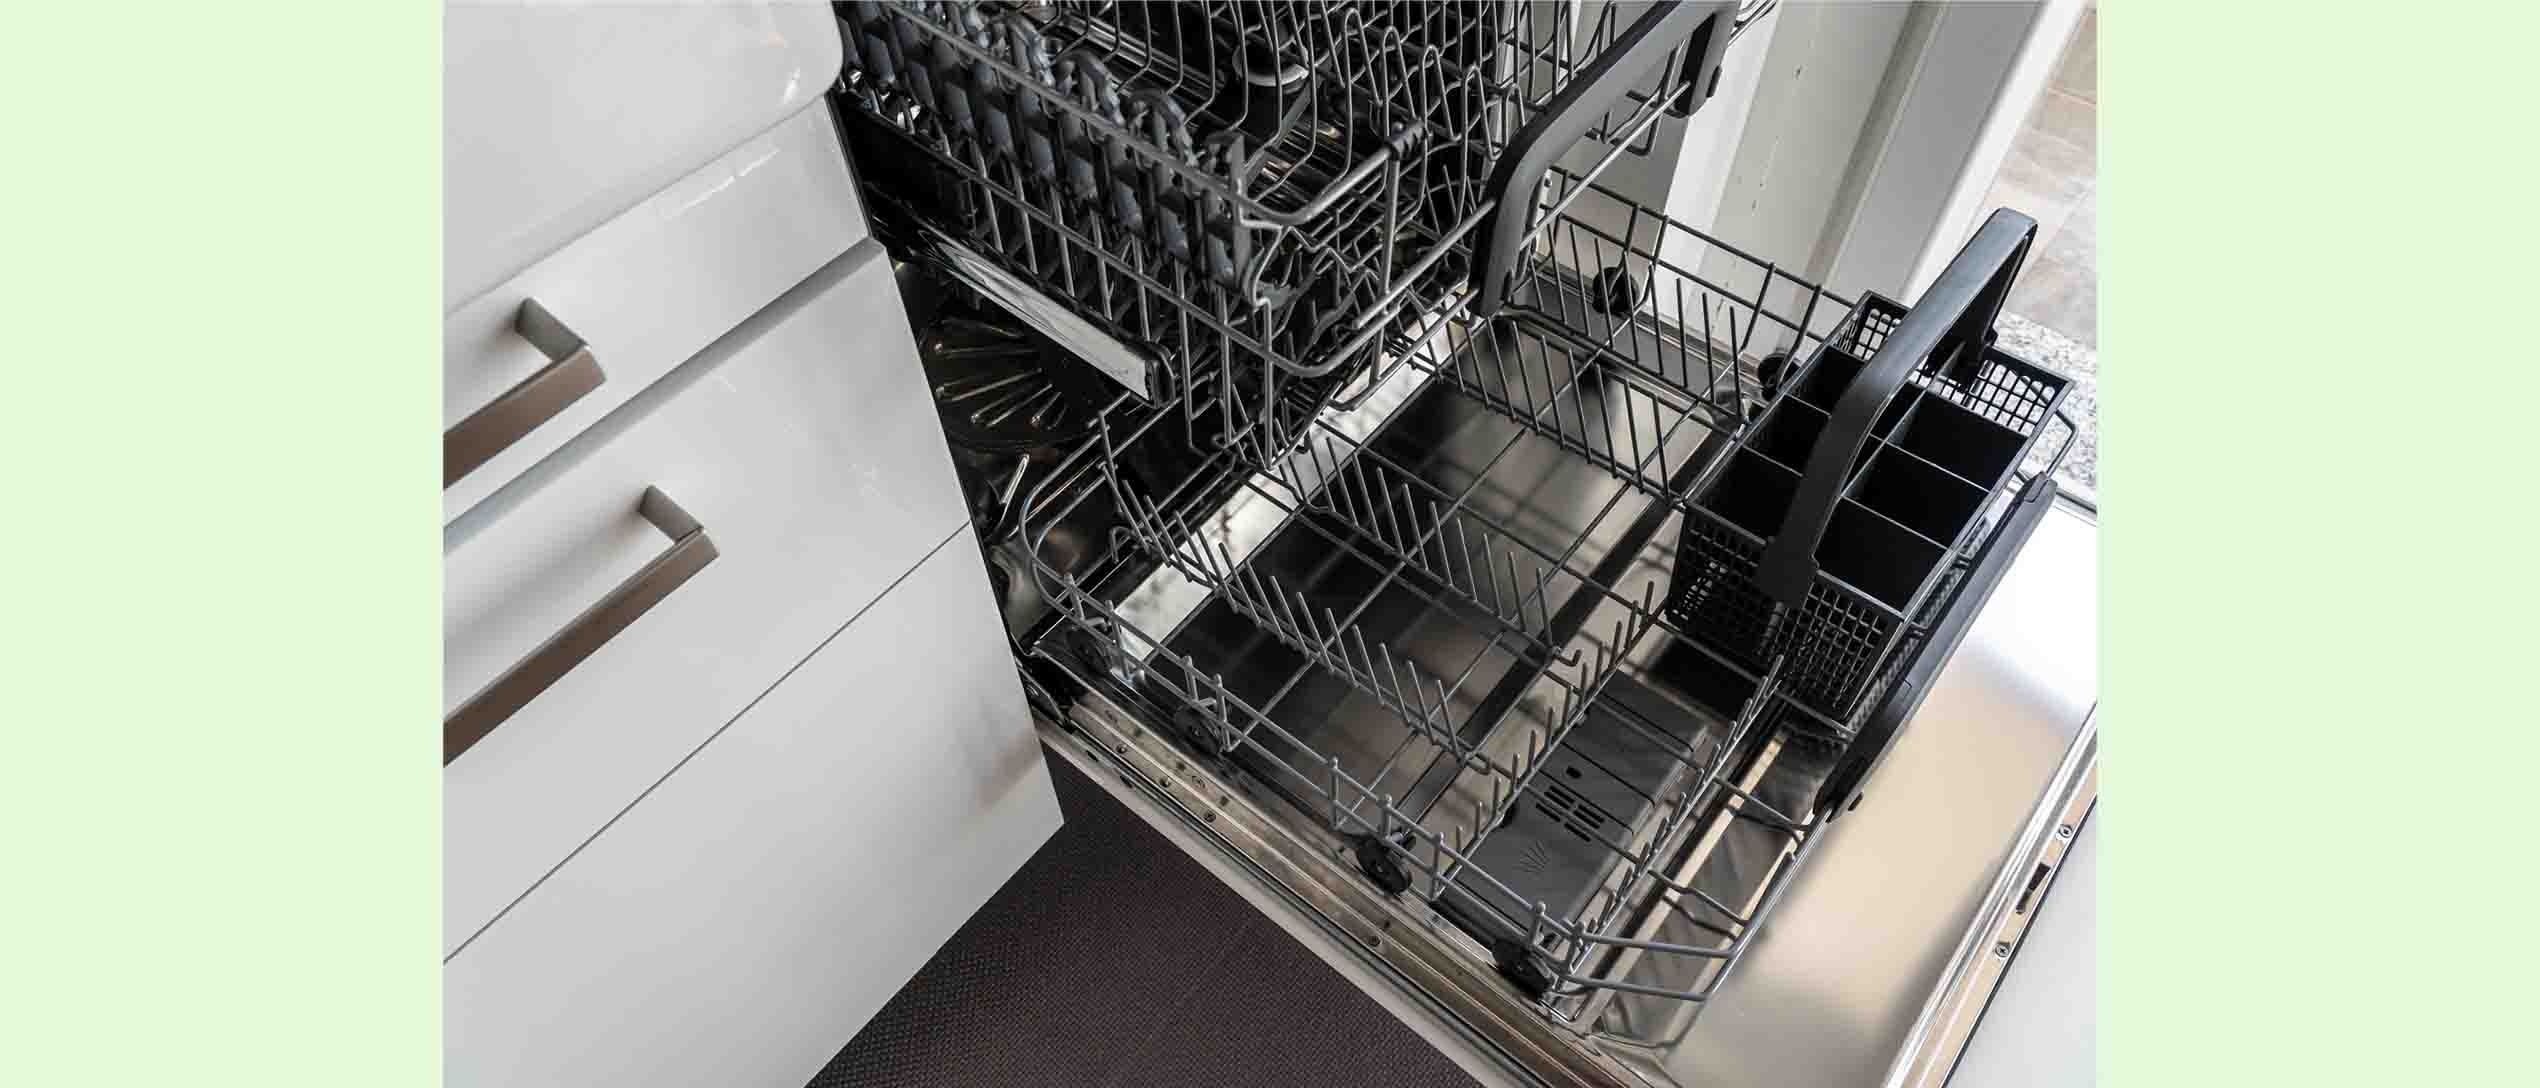 a close up shot of an open and empty dishwasher in a kitchen